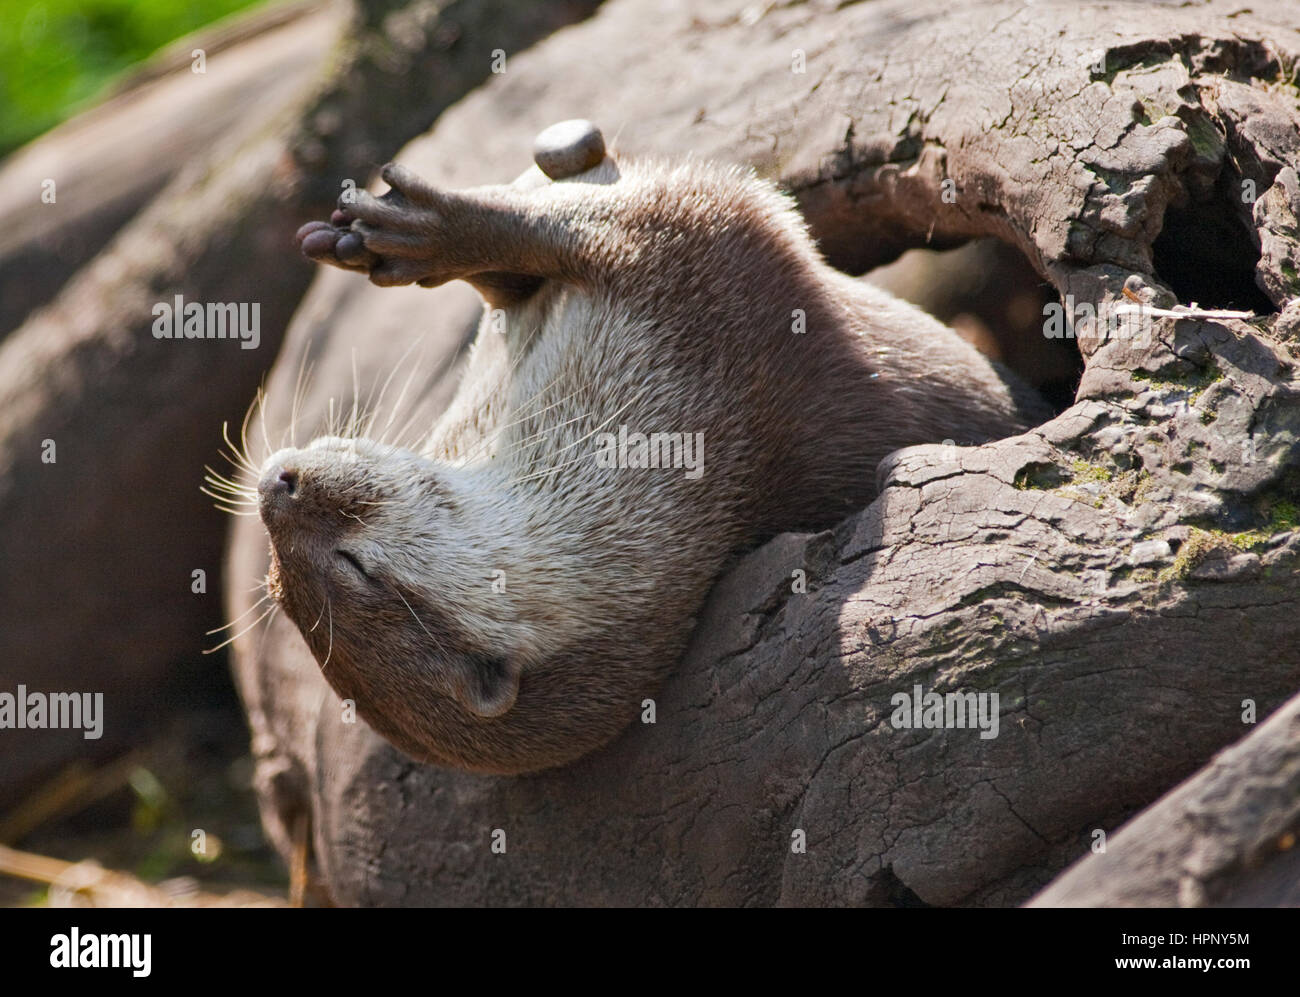 Asian Small Clawed Otter (aonyz cinerea) playing with a Pebble Stock Photo